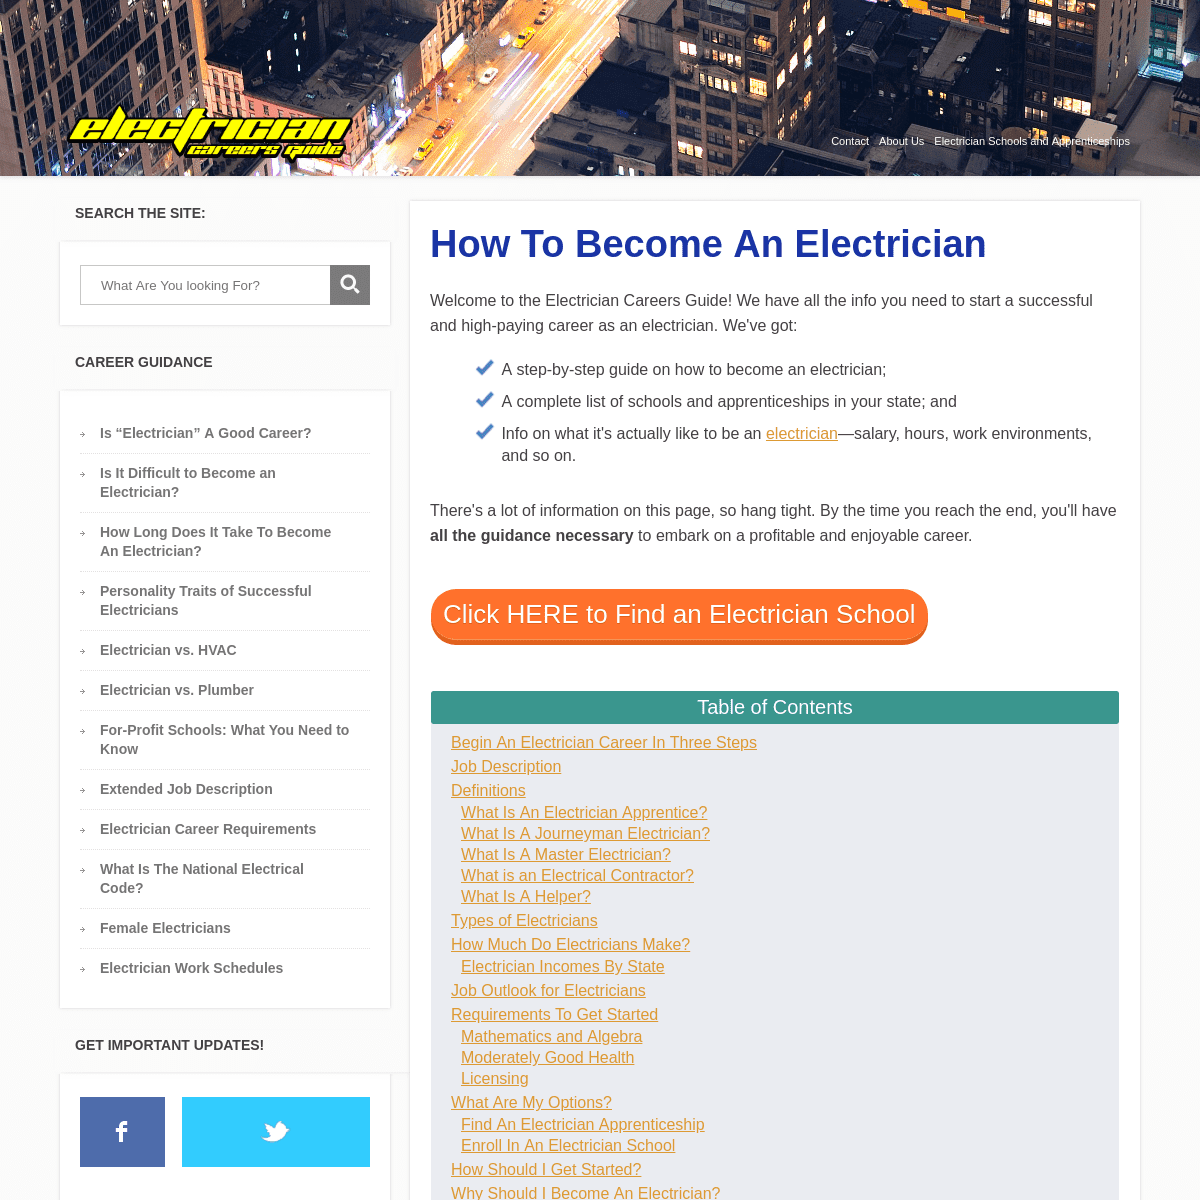 How to Become an Electrician